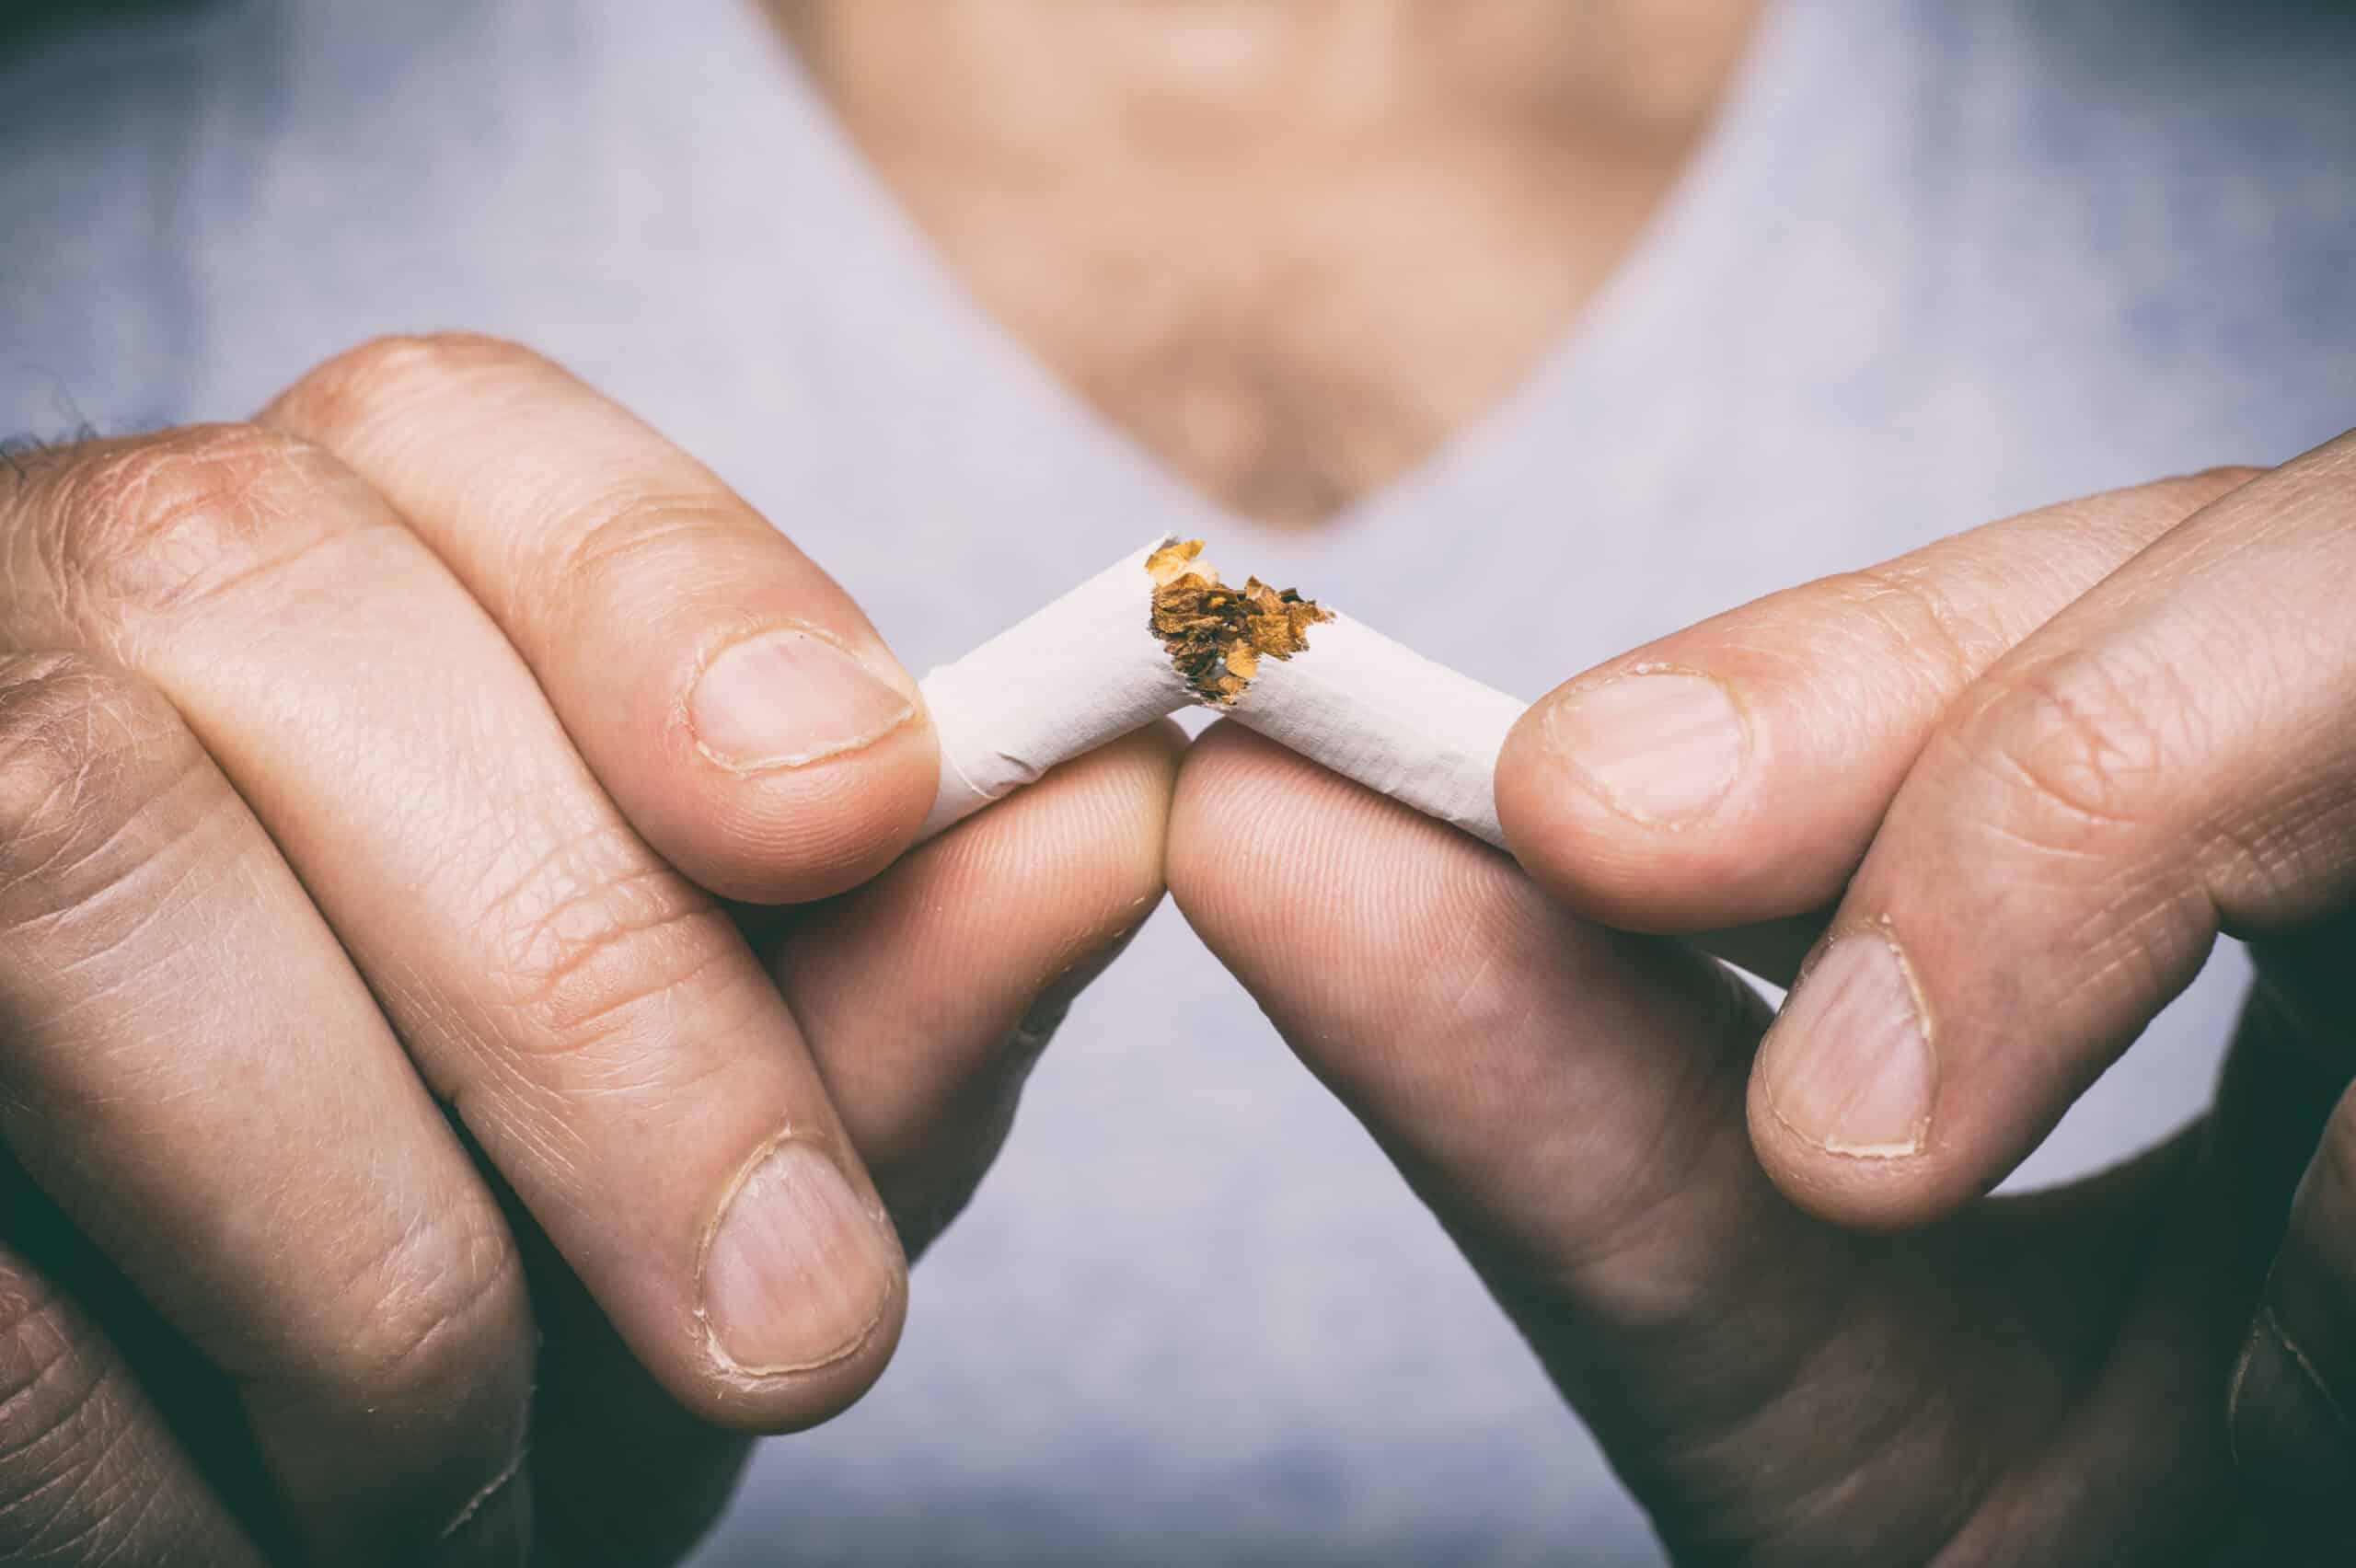 How tobacco use affects oral health